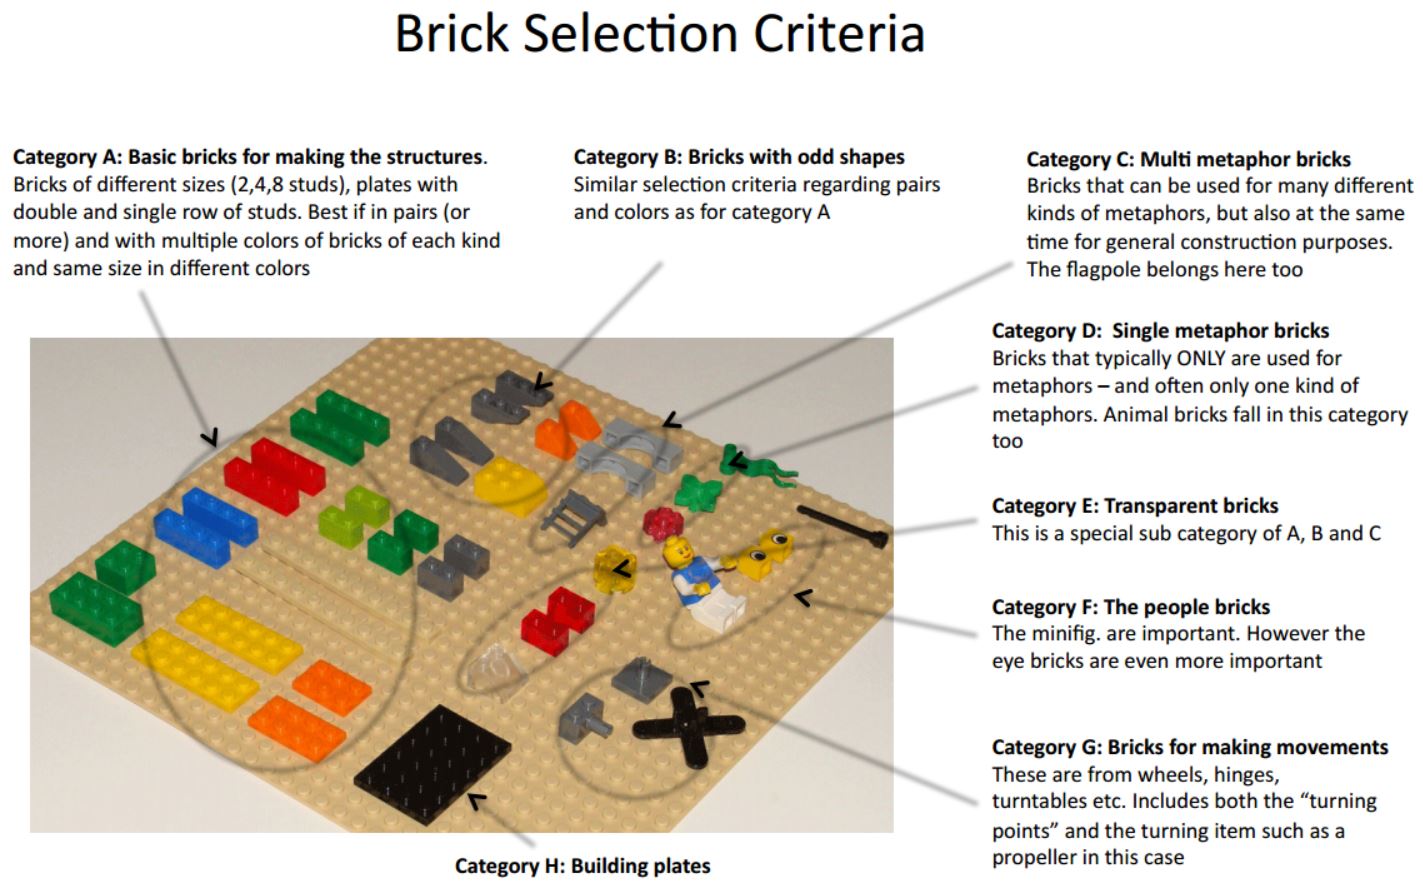 Brick Selection Criteria for Lego Serious Play sessions - by Robert Rasmussen